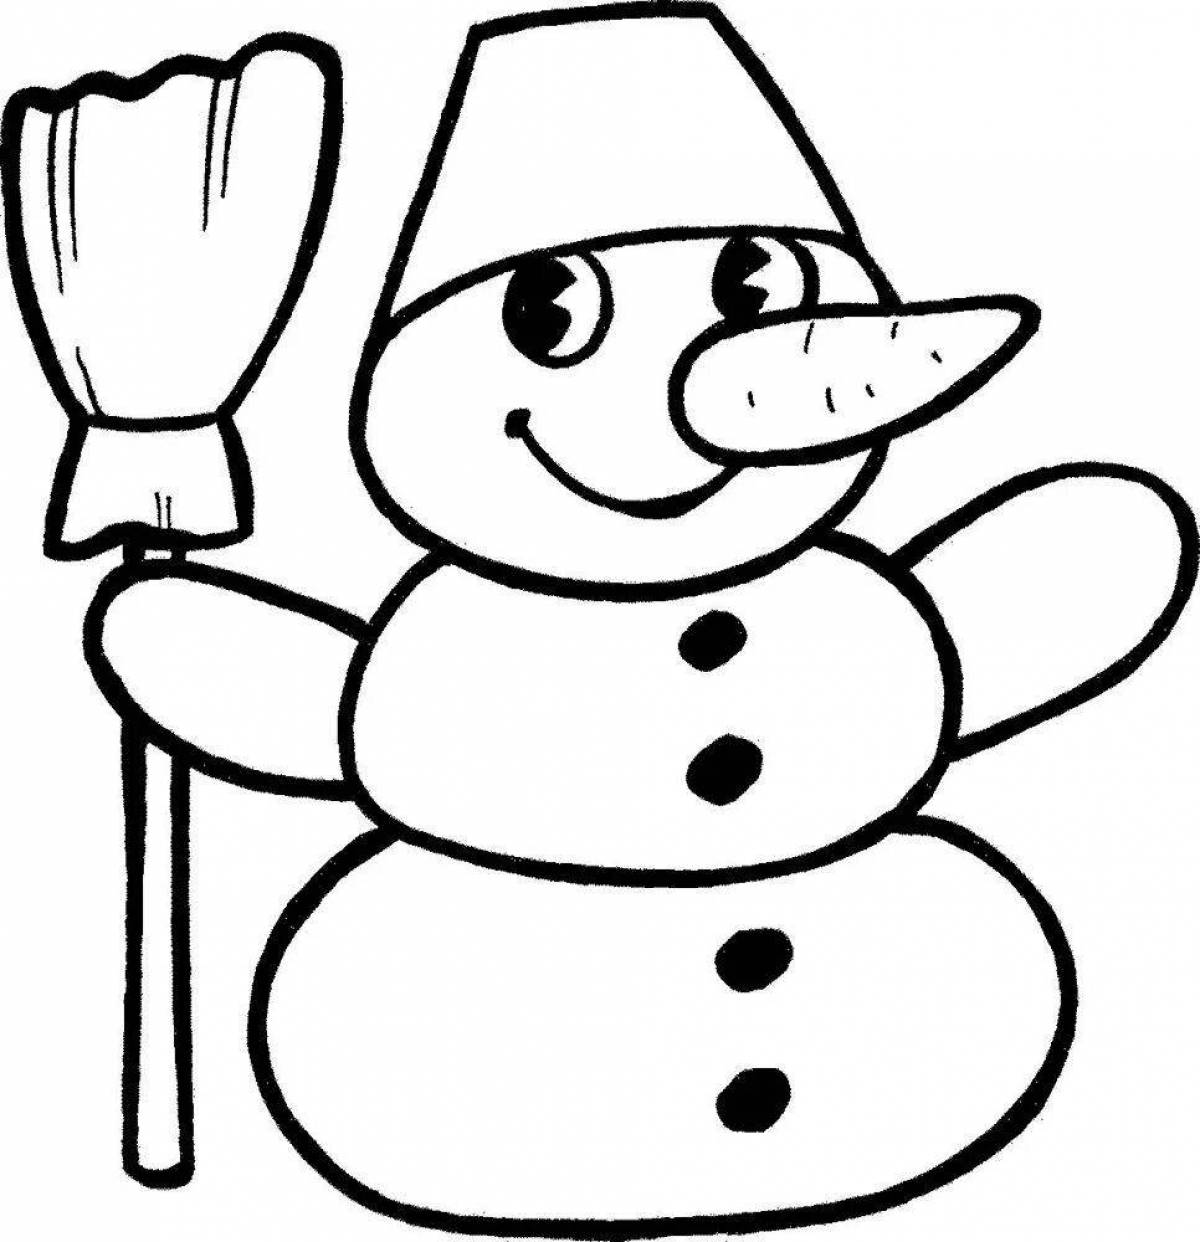 Colorful snowman coloring book for kids 3 4